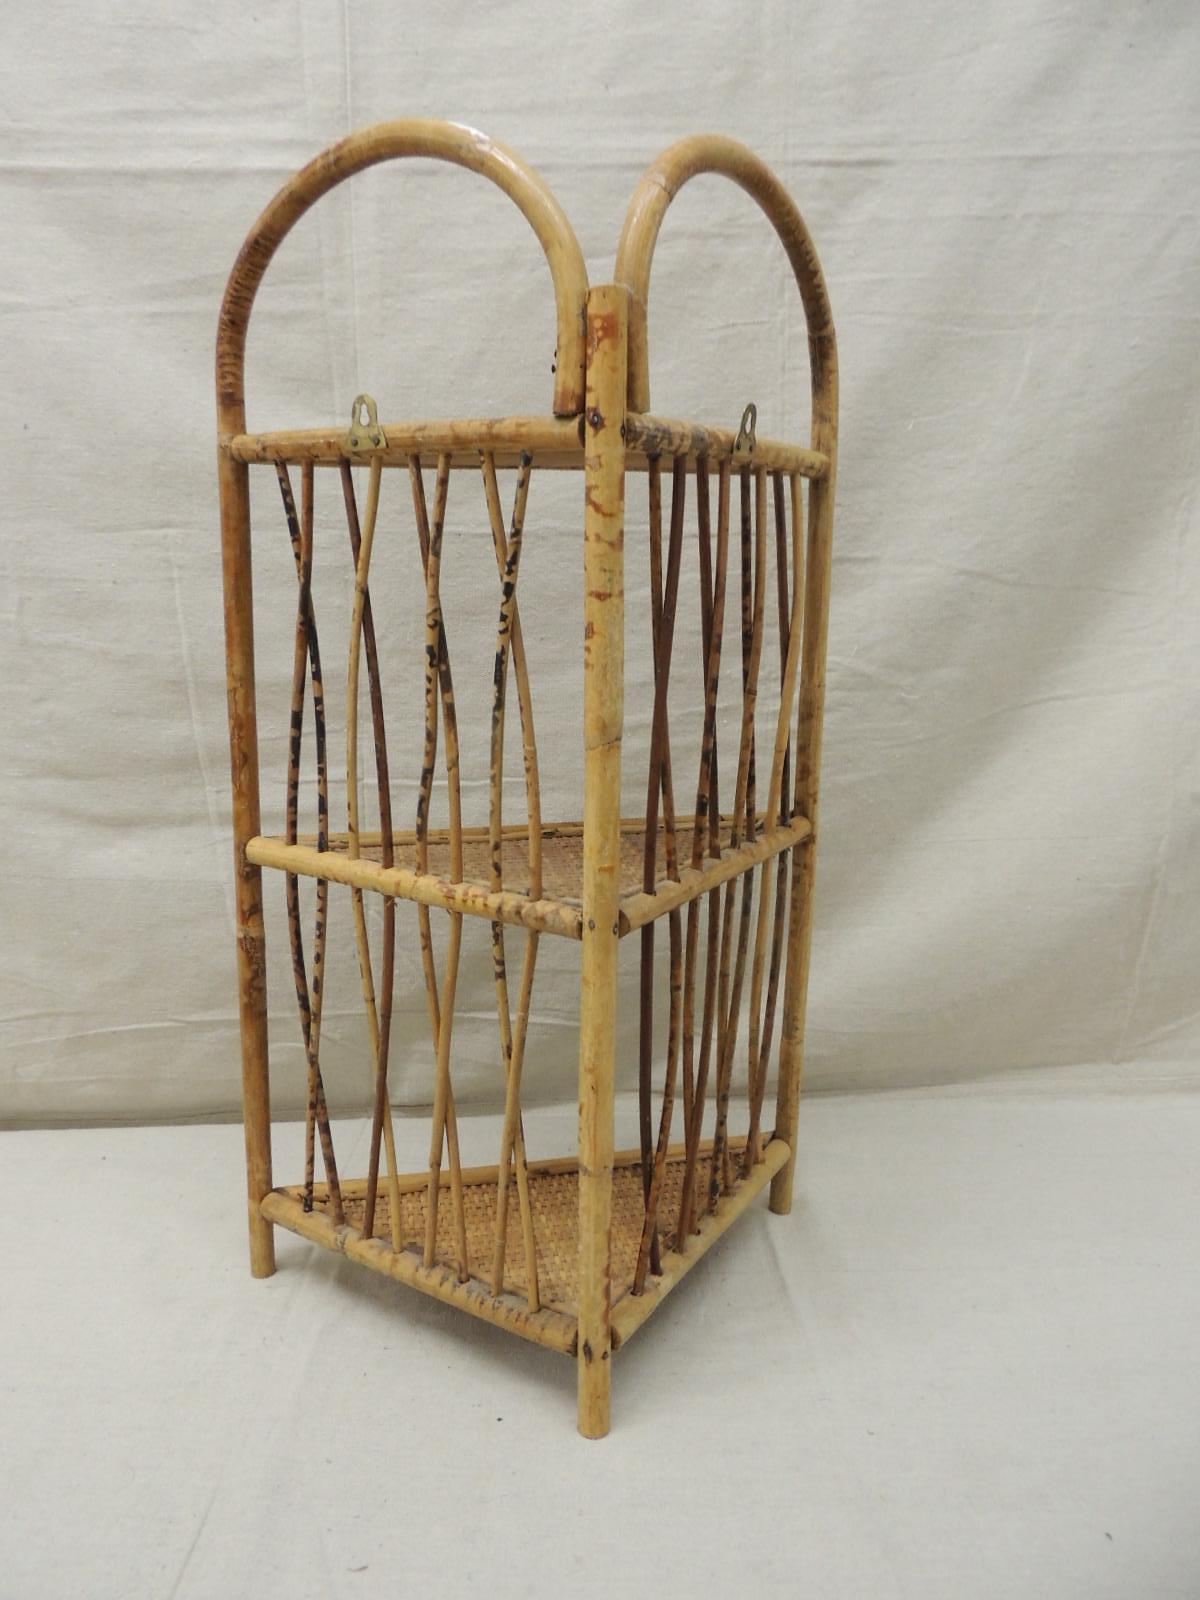 Organic Modern Vintage 3 Tiers Wall Shelf in Tortoiseshell Bamboo and Rattan with Hanging Hooks